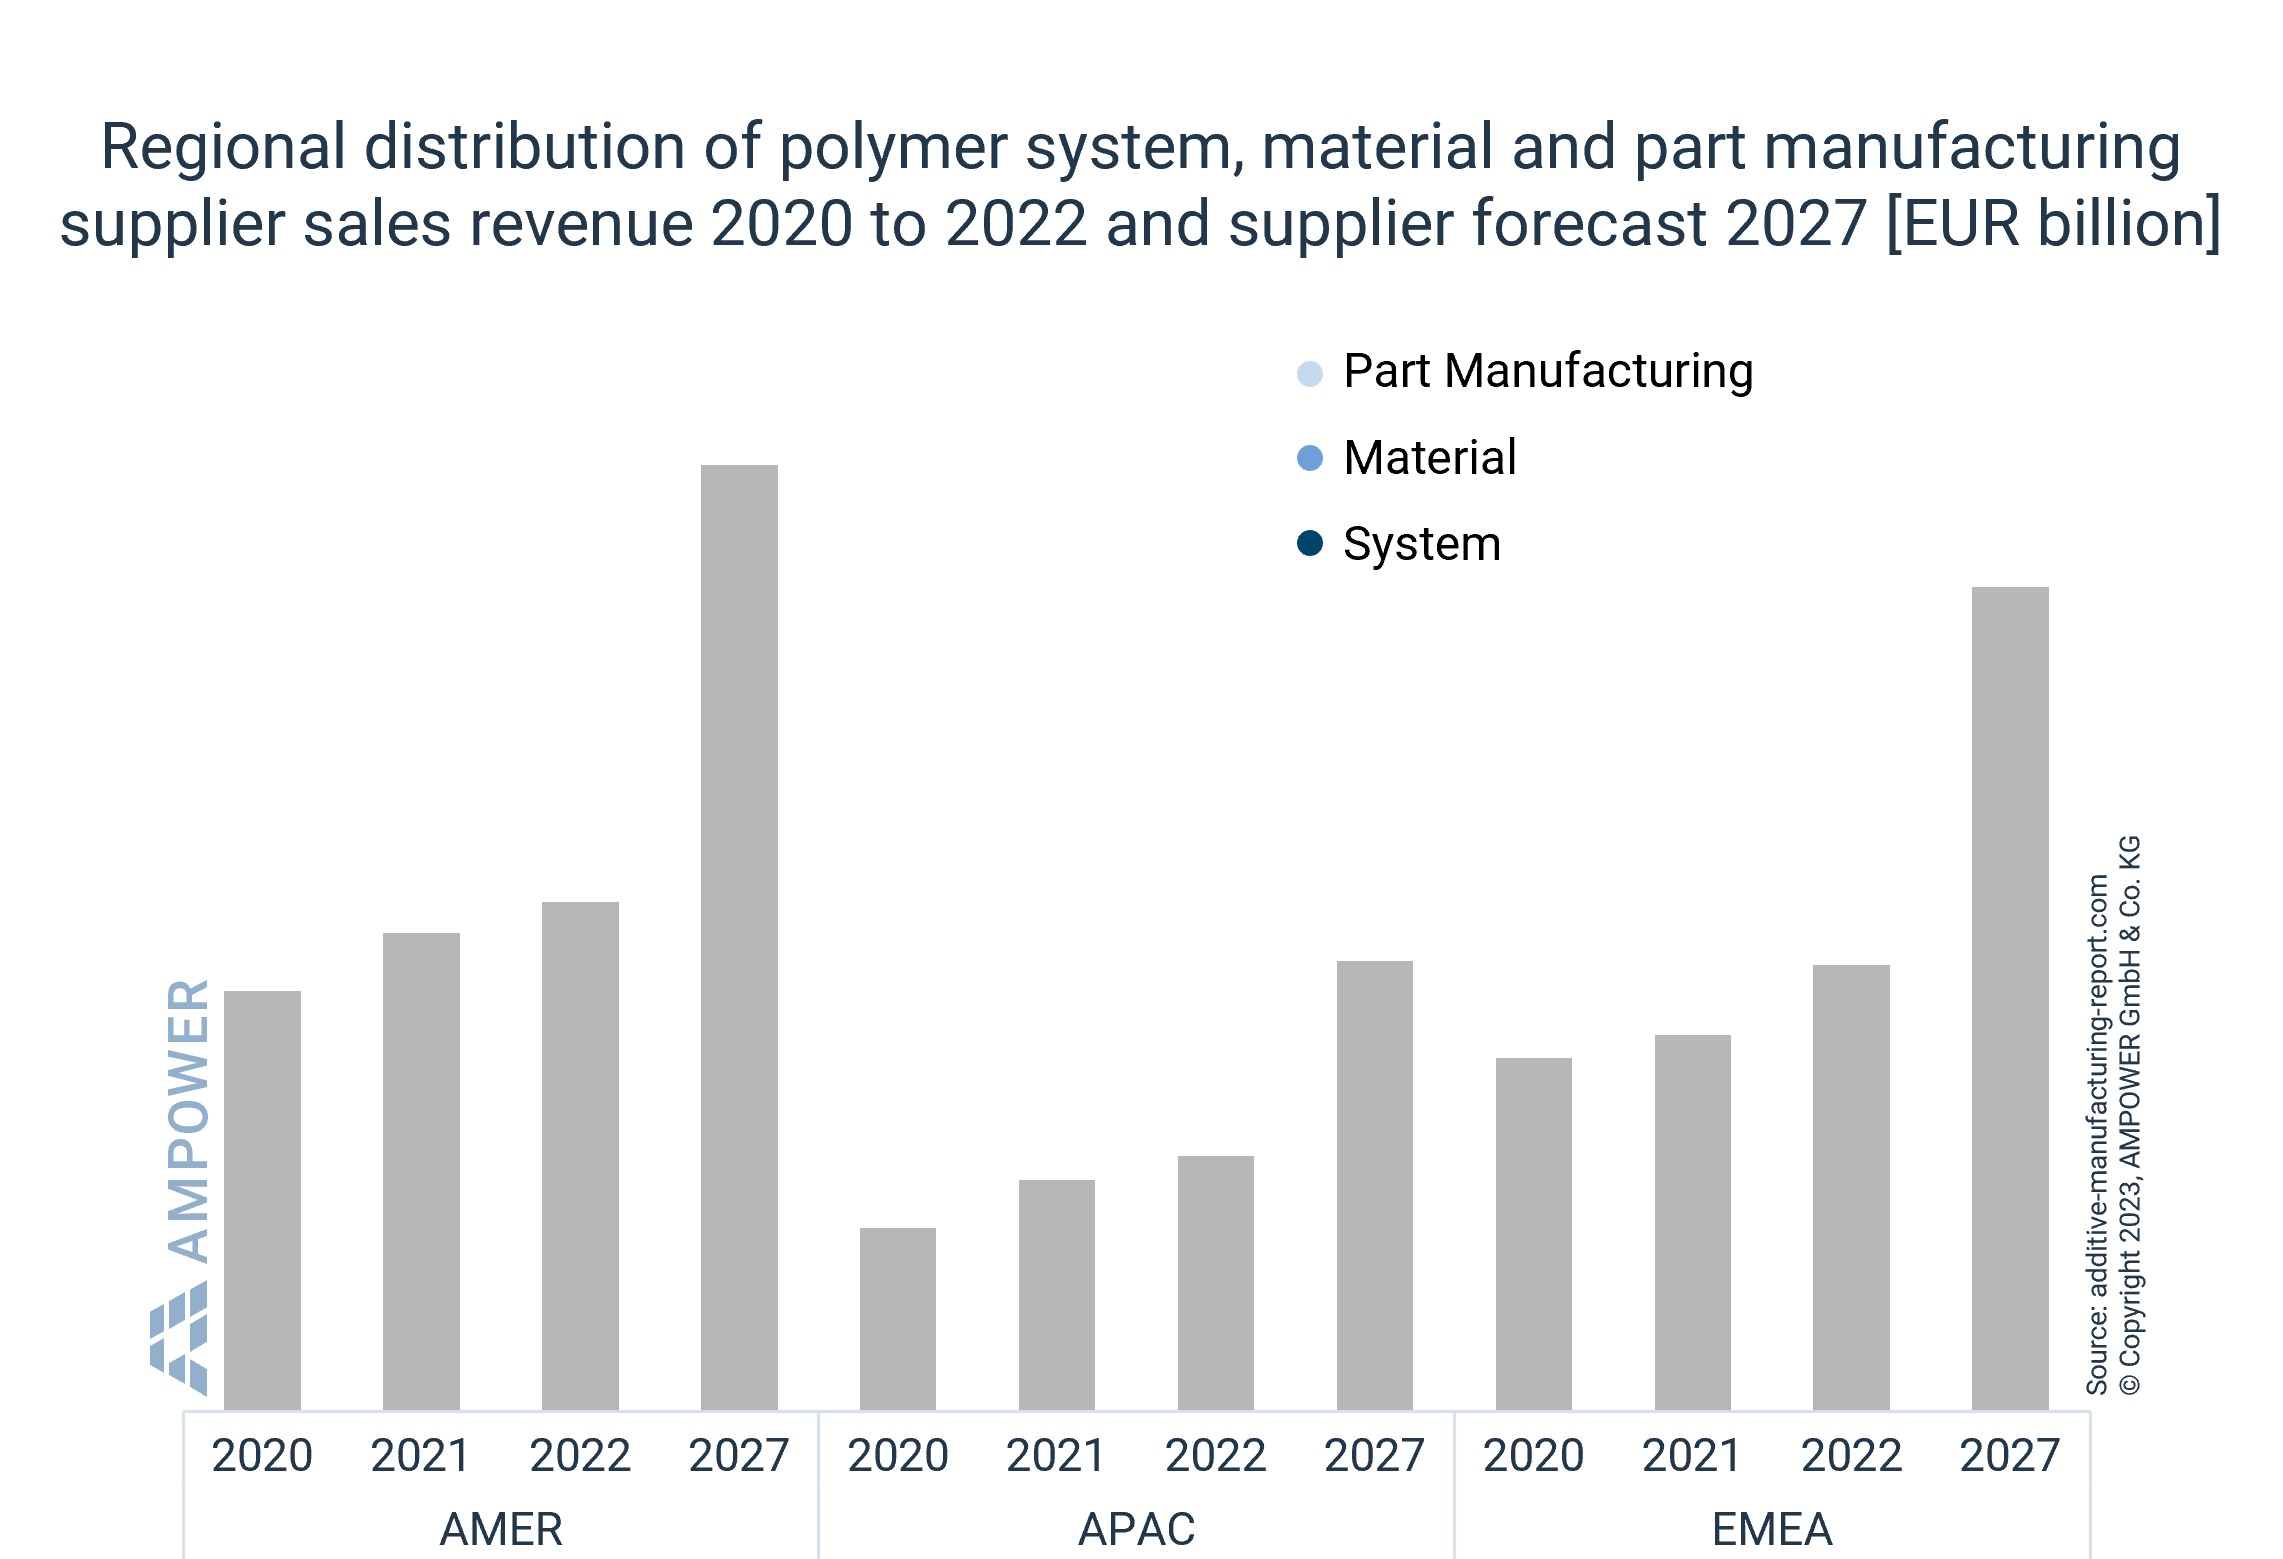 Regional distribution of polymer system, material and part manufacturing supplier sales revenue 2020 to 2022 and supplier forecast 2027 [EUR billion]